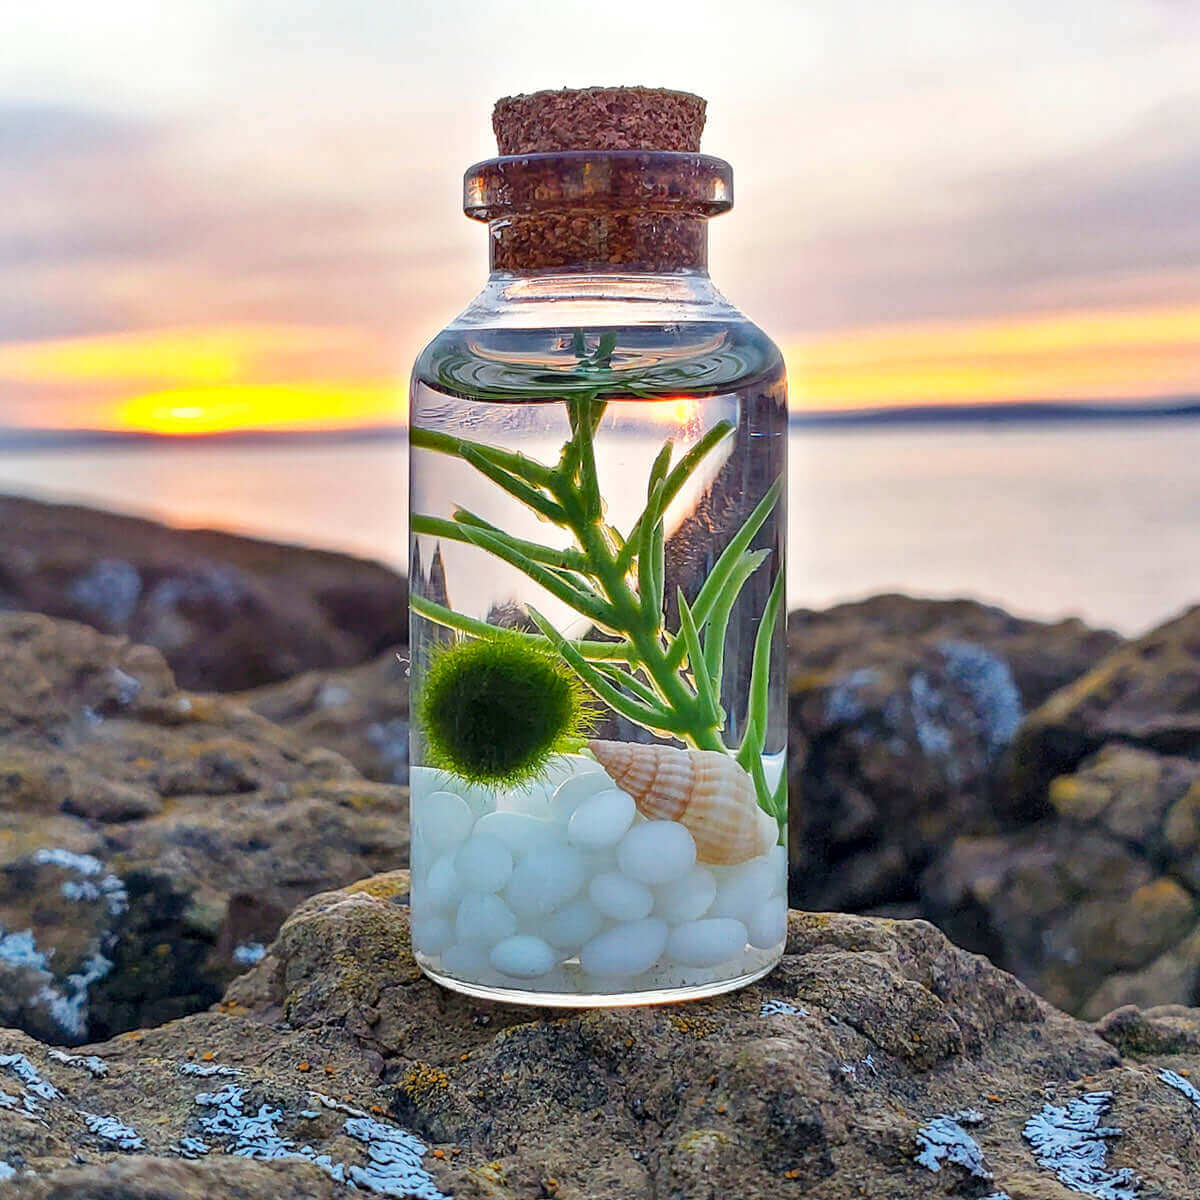 AVAILABLE NOW: Locally Grown Marimo Moss Balls 1cm